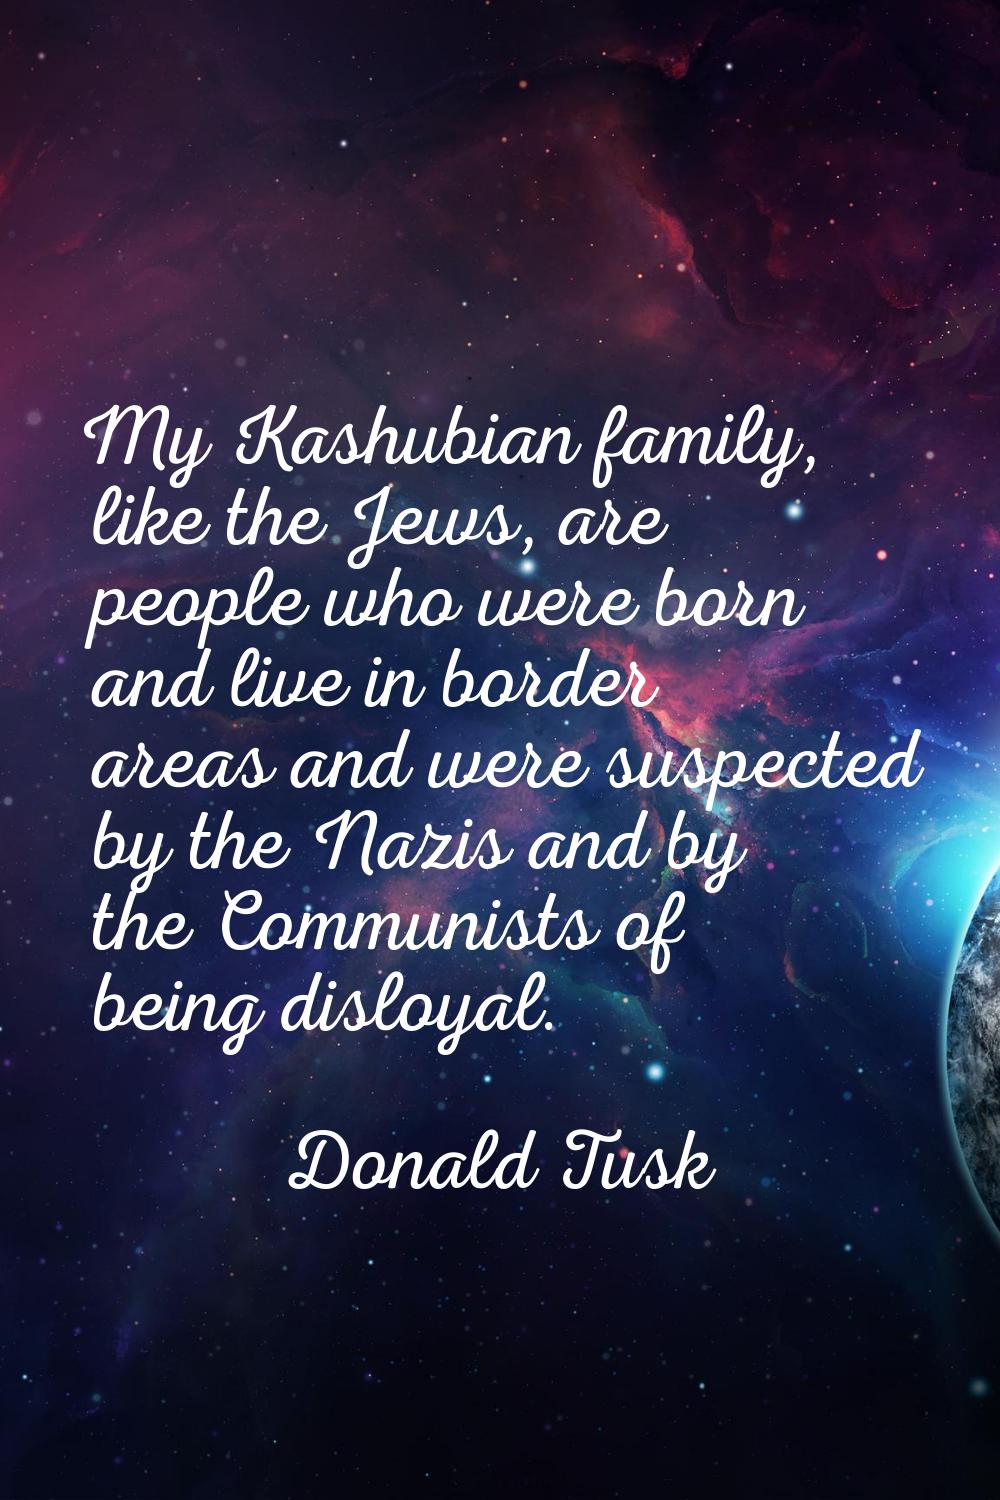 My Kashubian family, like the Jews, are people who were born and live in border areas and were susp